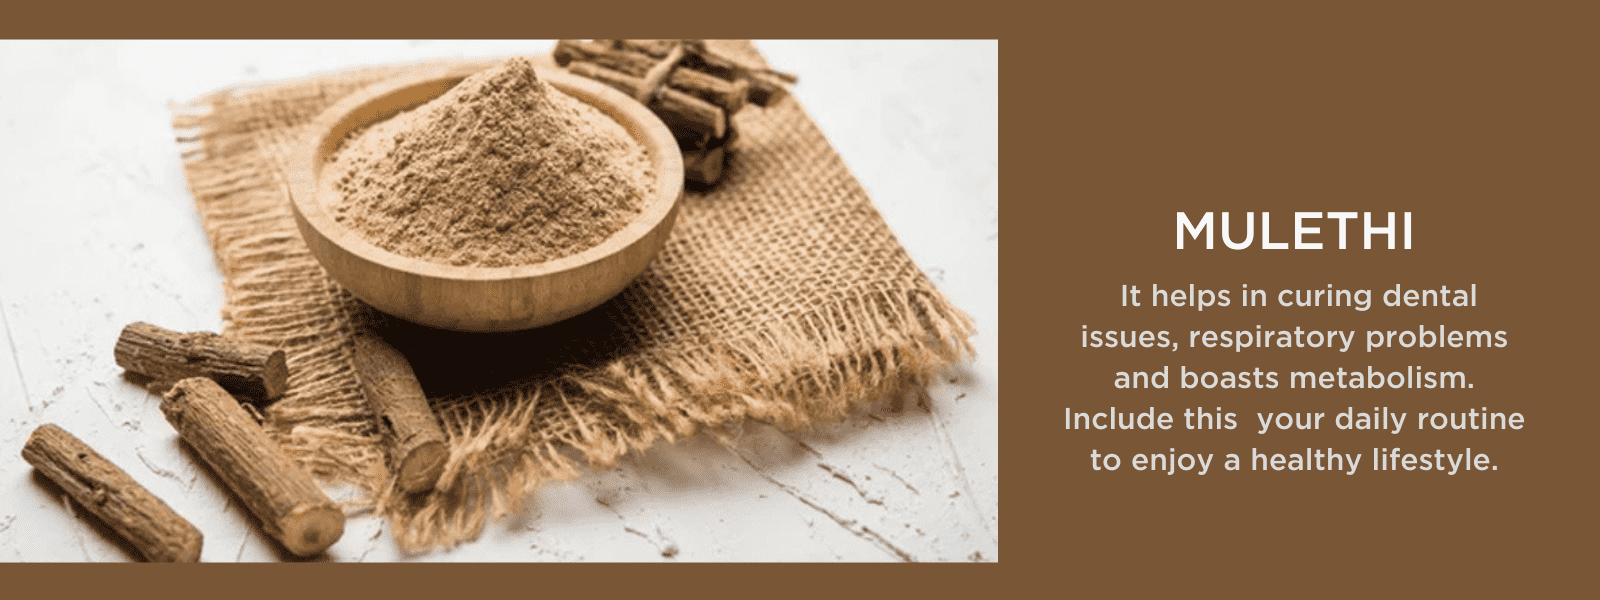 Mulethi- Health Benefits, Uses and Important Facts